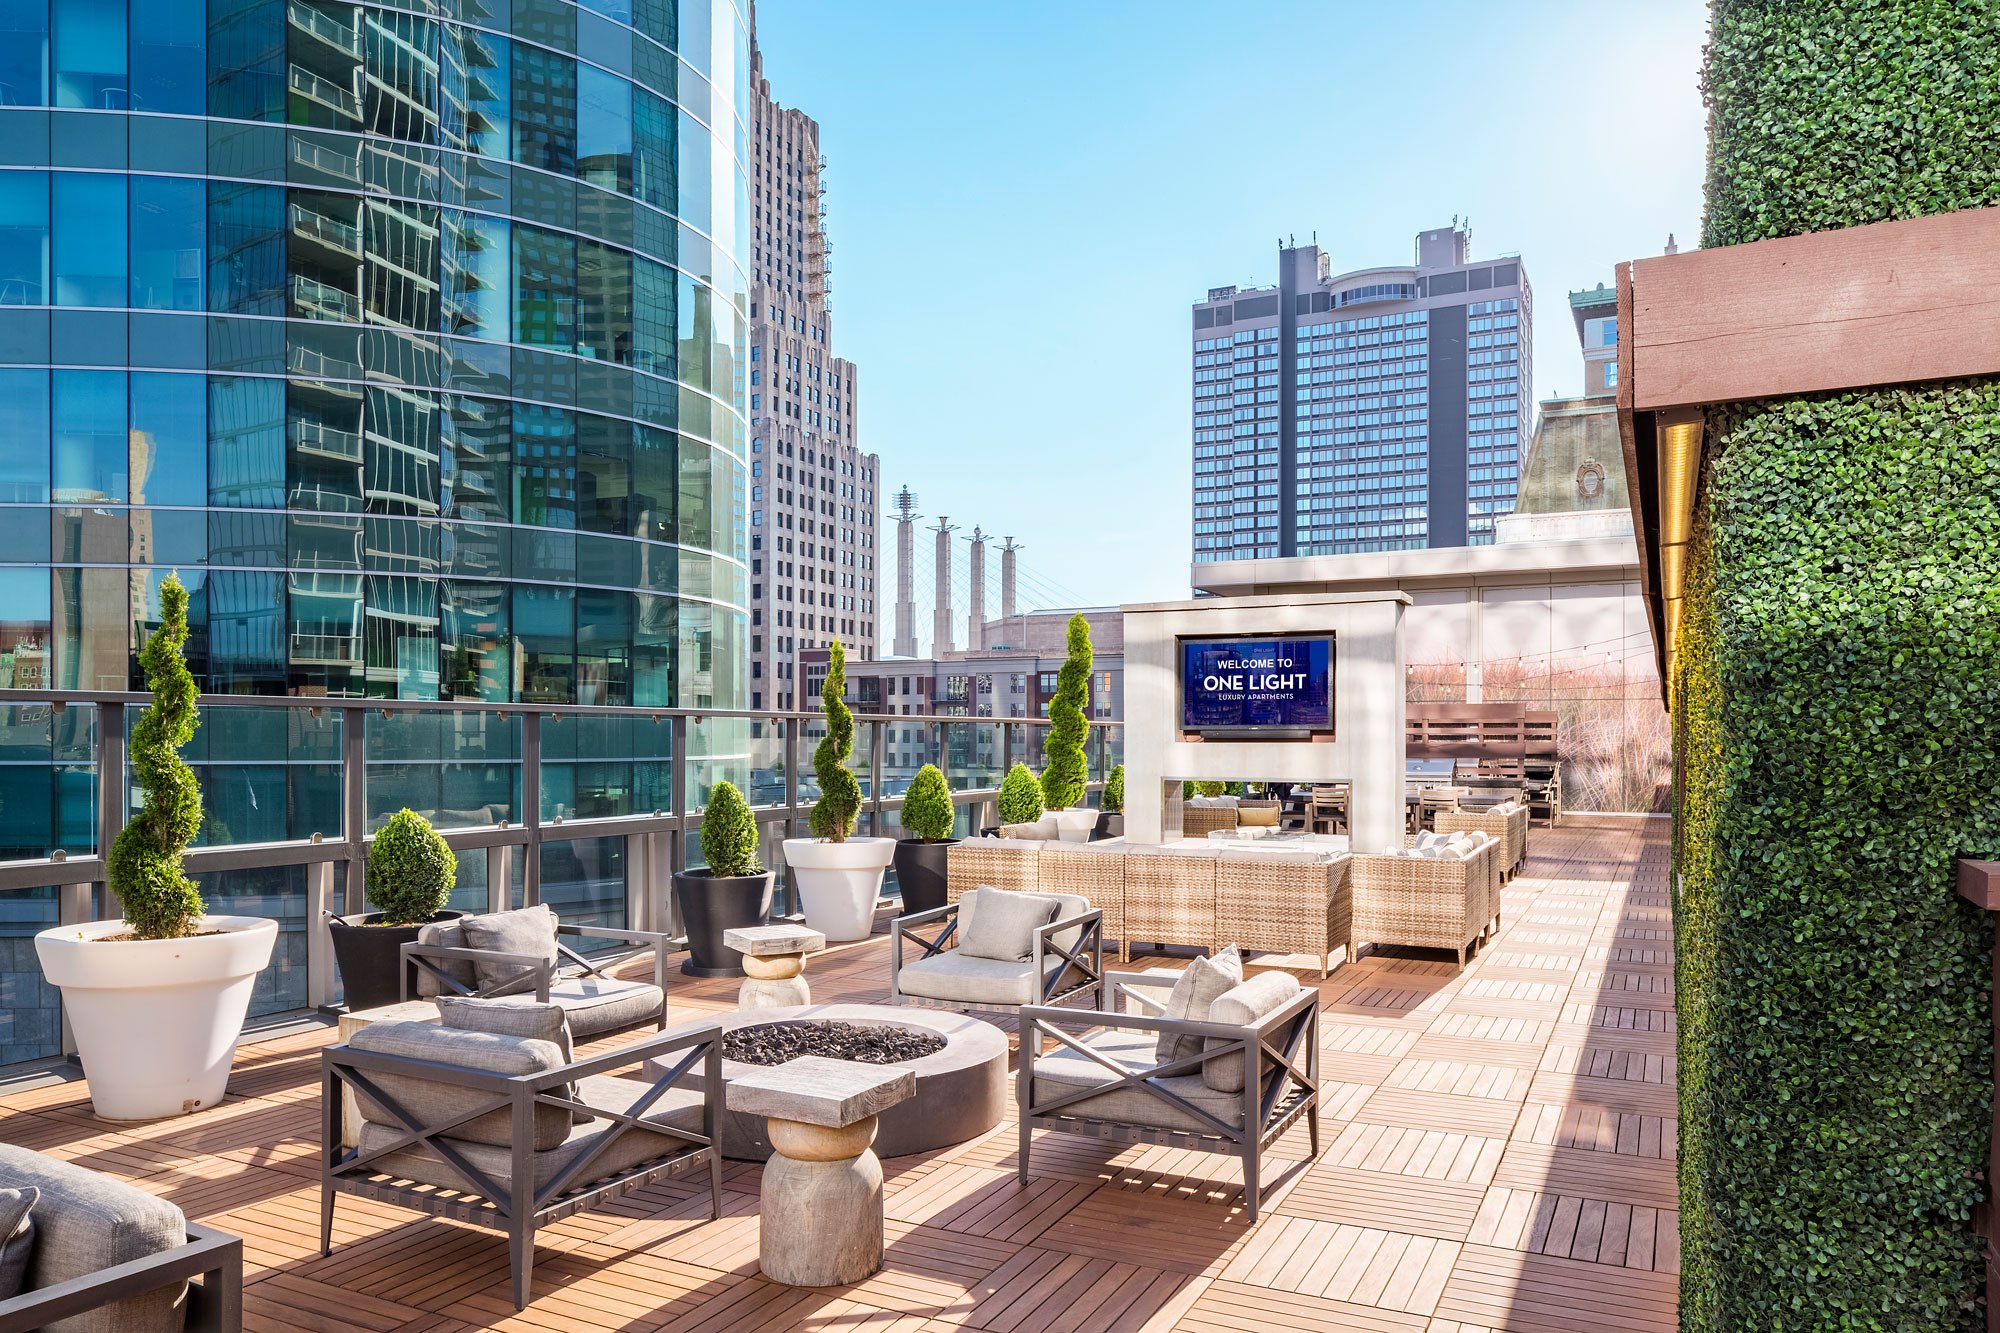 Rooftop lounge, fire pits, and grill amenities at One Light Luxury Apartment Community in the Power & Light District of Kansas City, MO